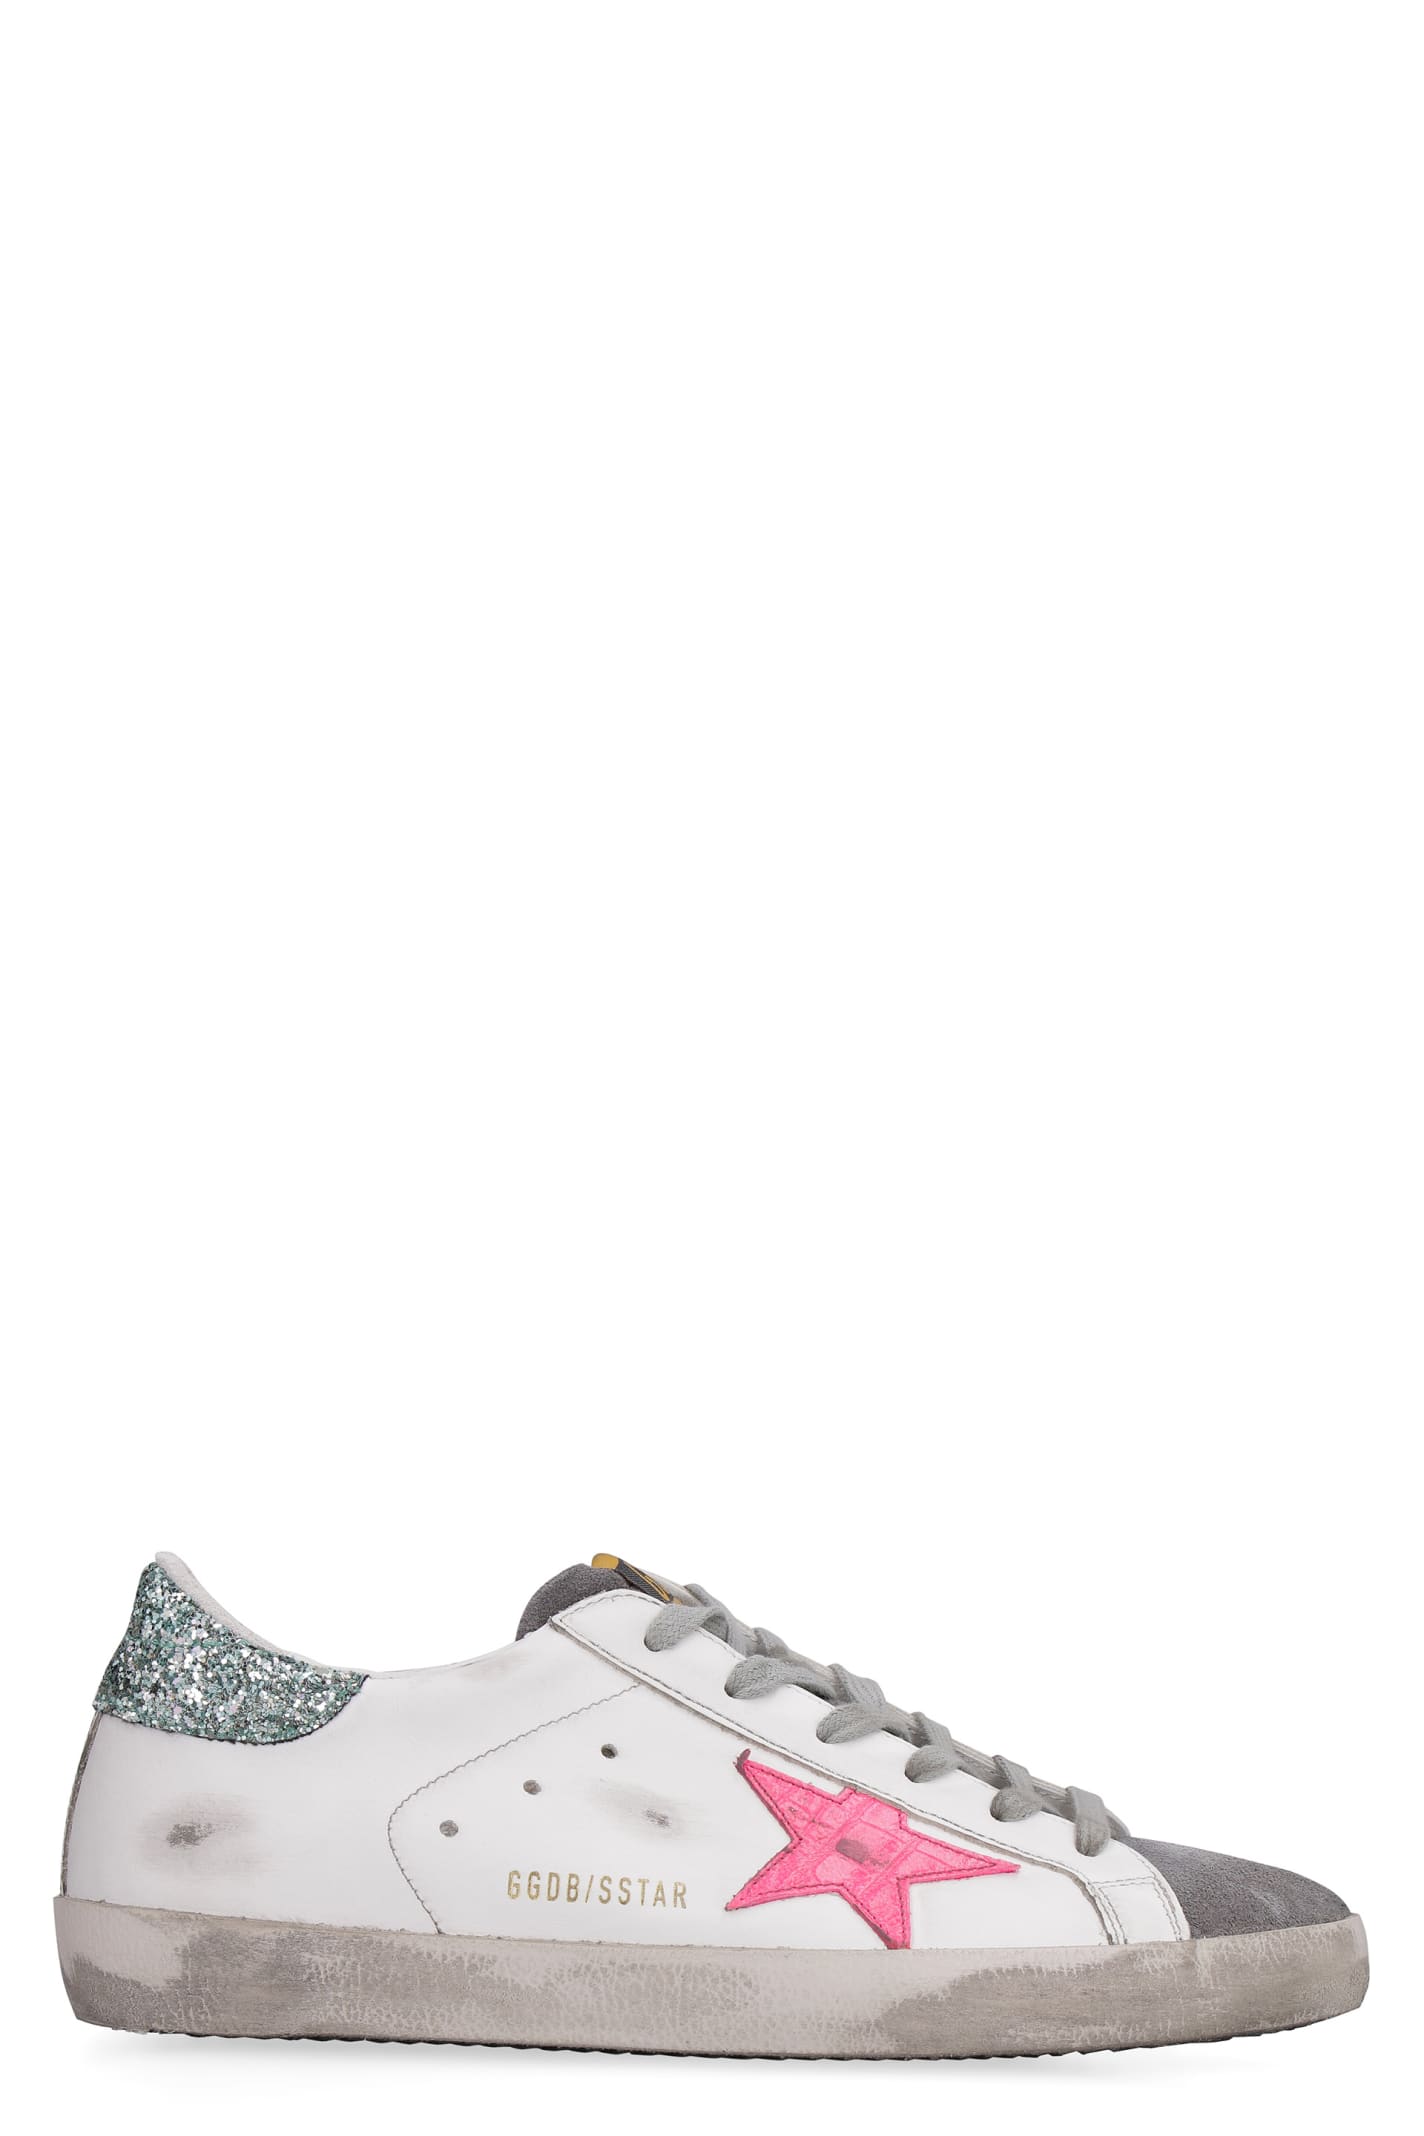 Golden Goose Leathers SUPERSTAR LEATHER SNEAKERS